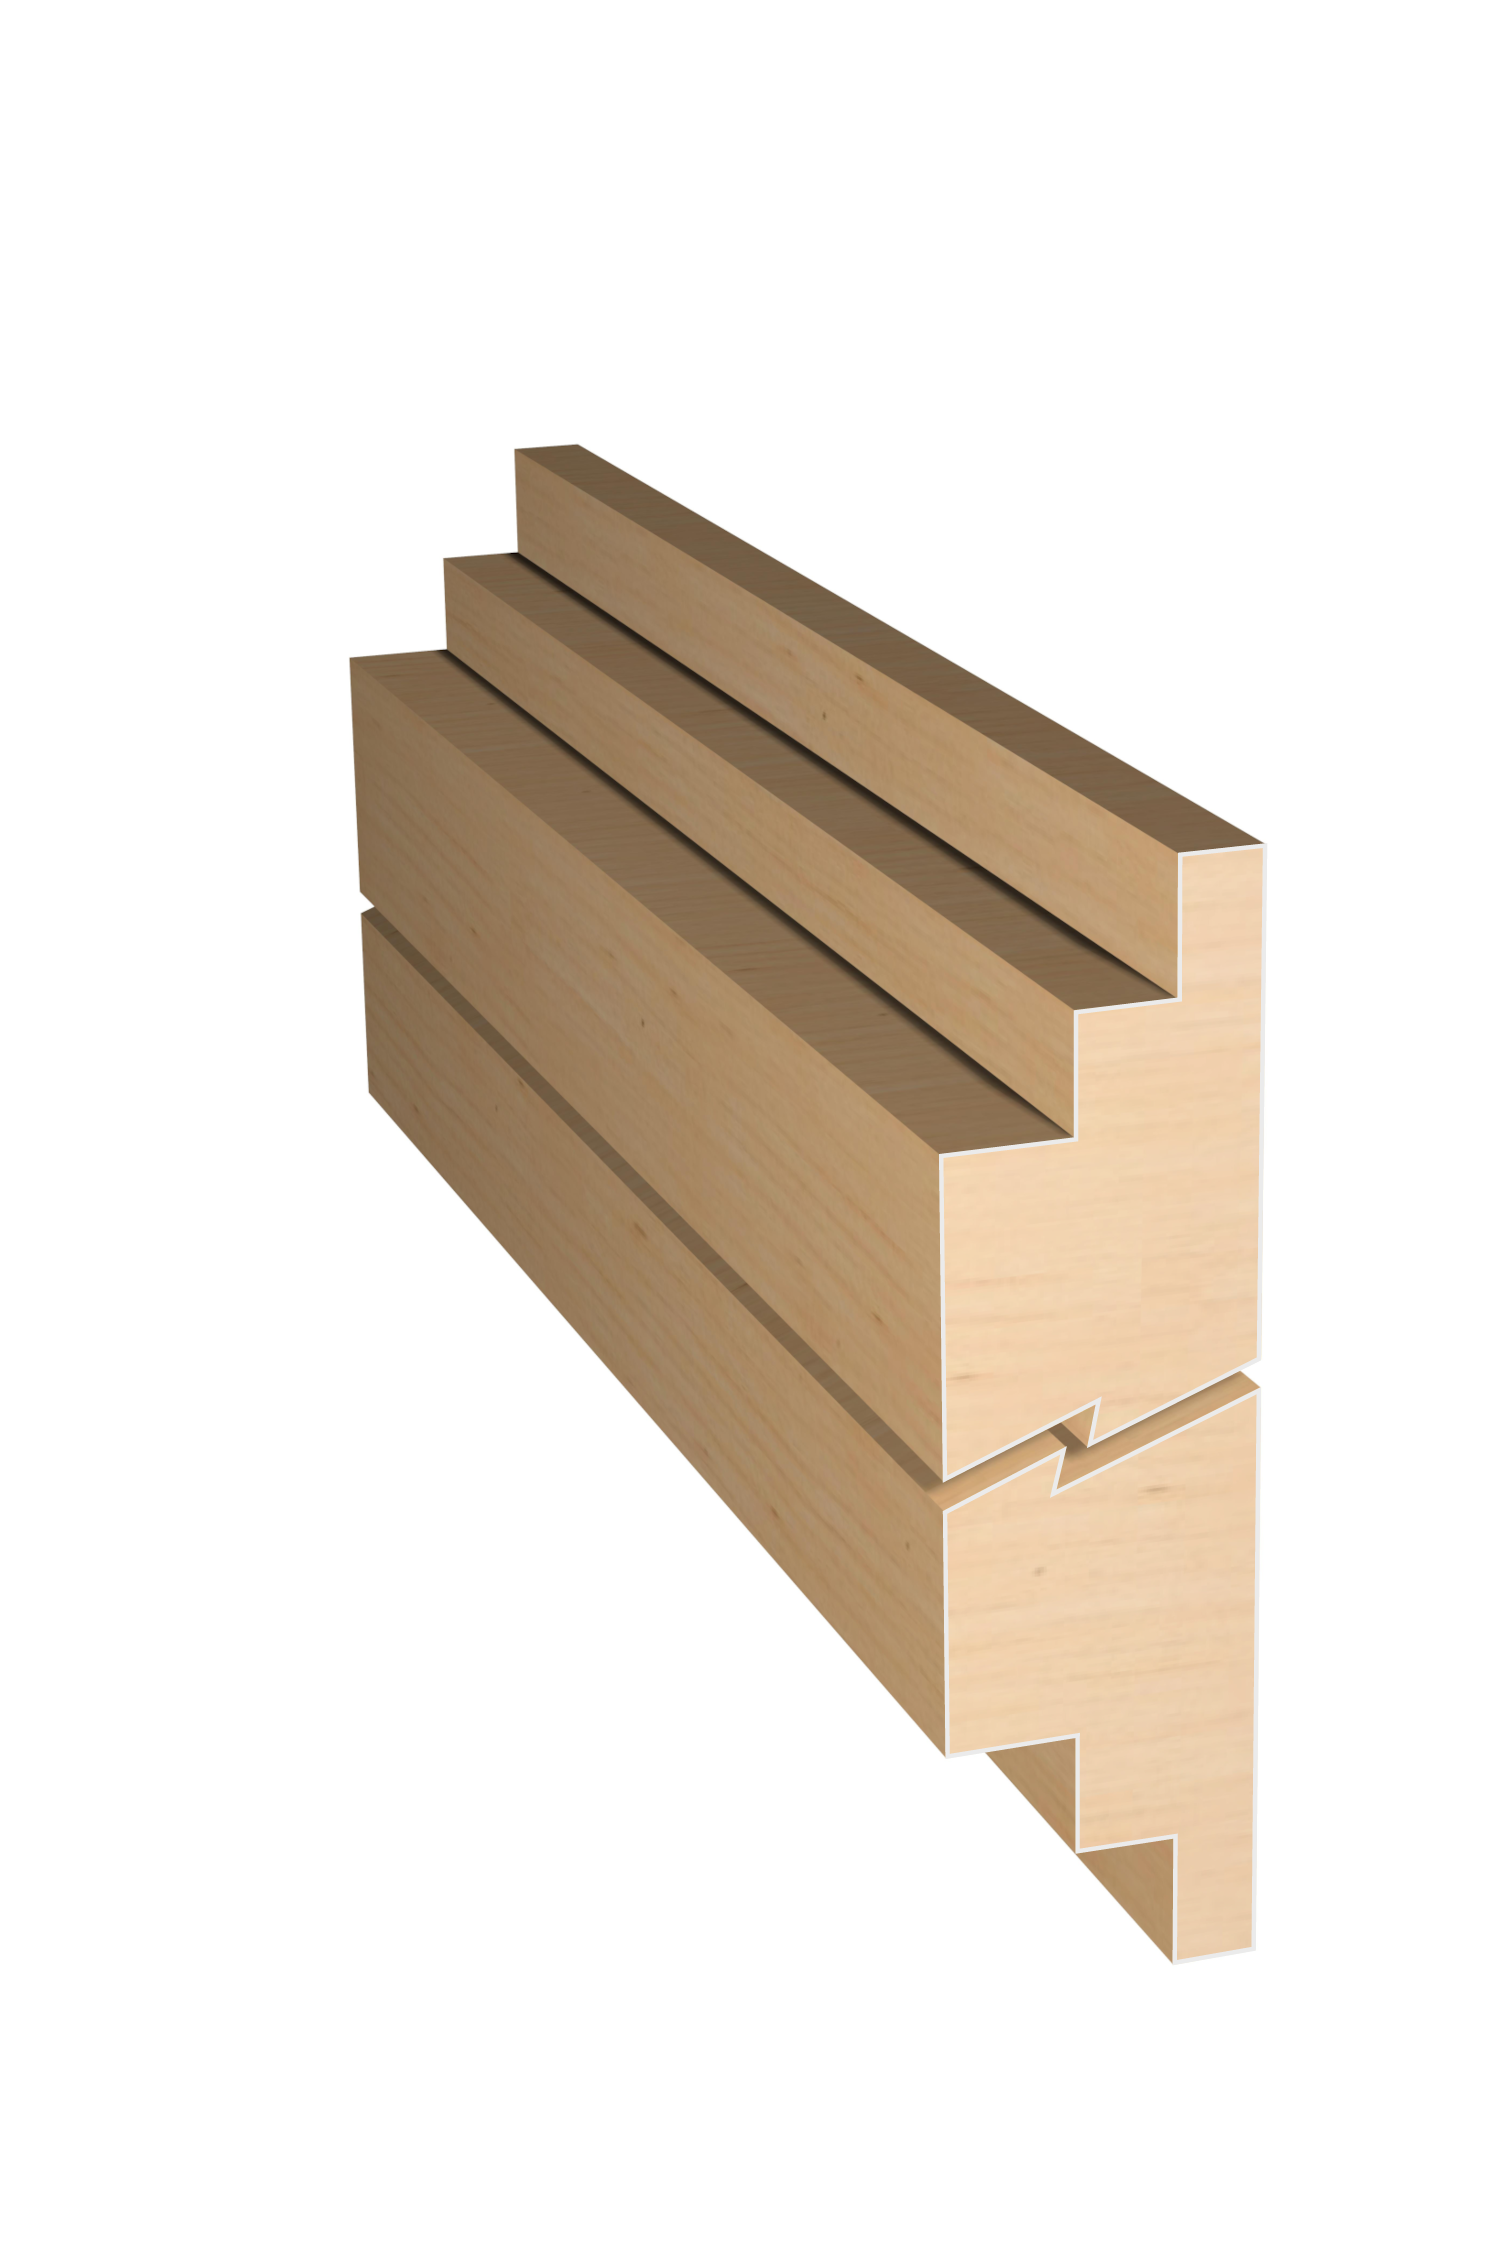 Three dimensional rendering of custom edge profile wood molding SKPL11 made by Public Lumber Company in Detroit.